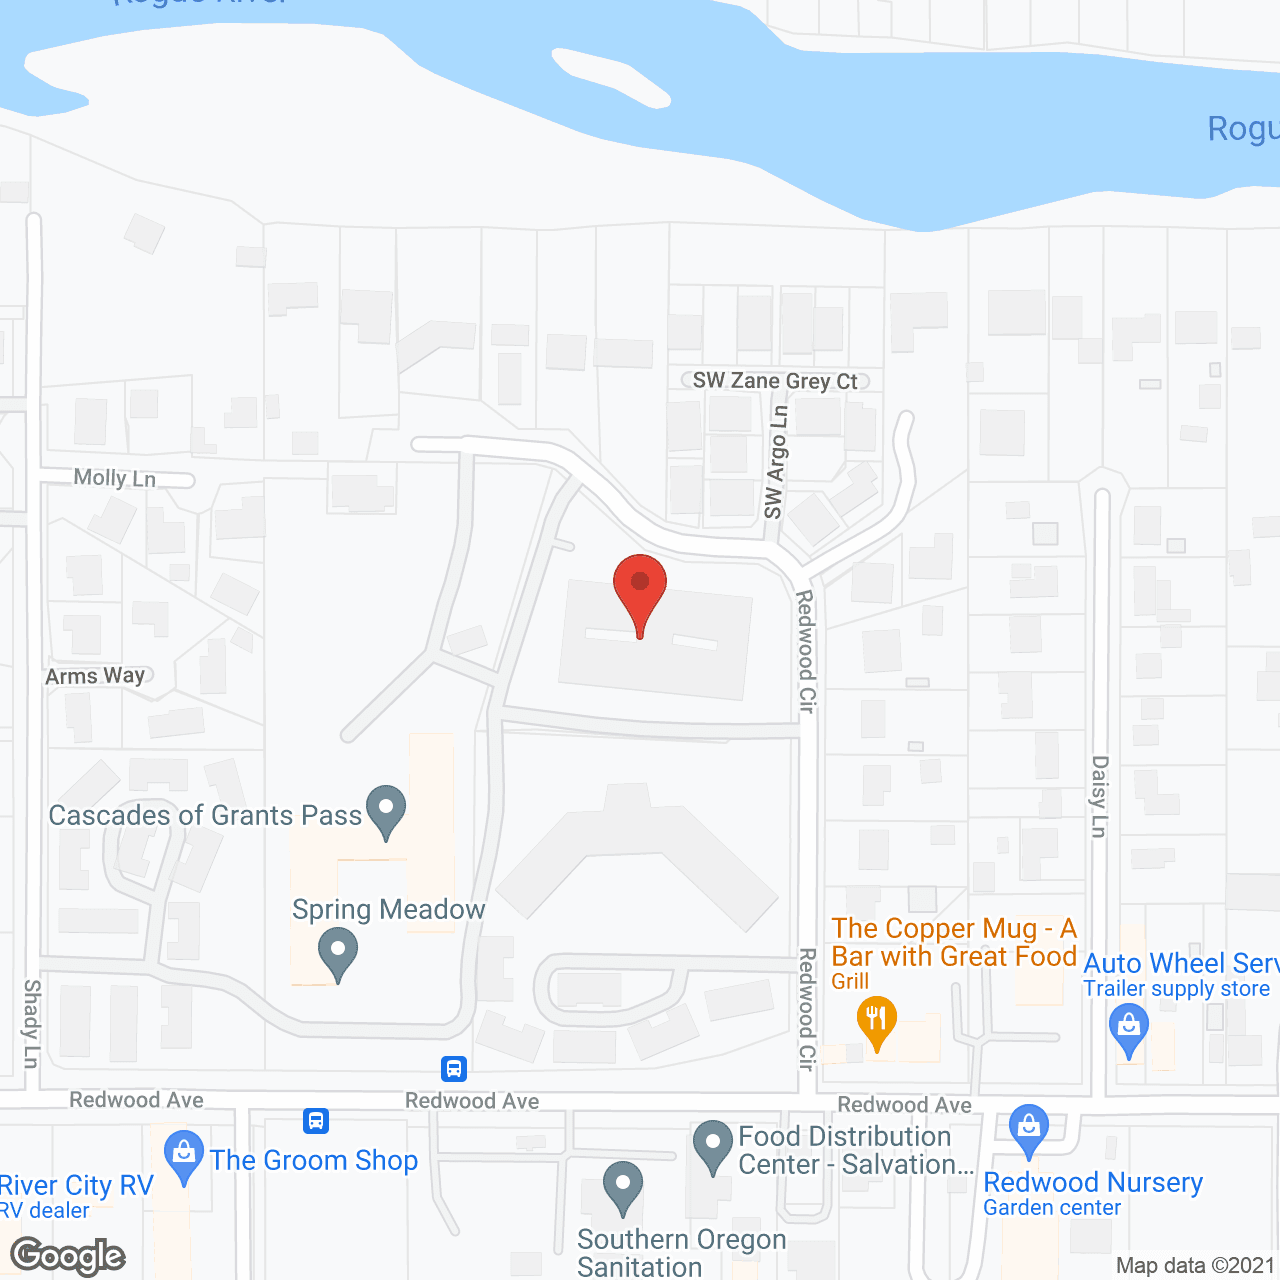 Cascades of Grants Pass - The Pointe in google map